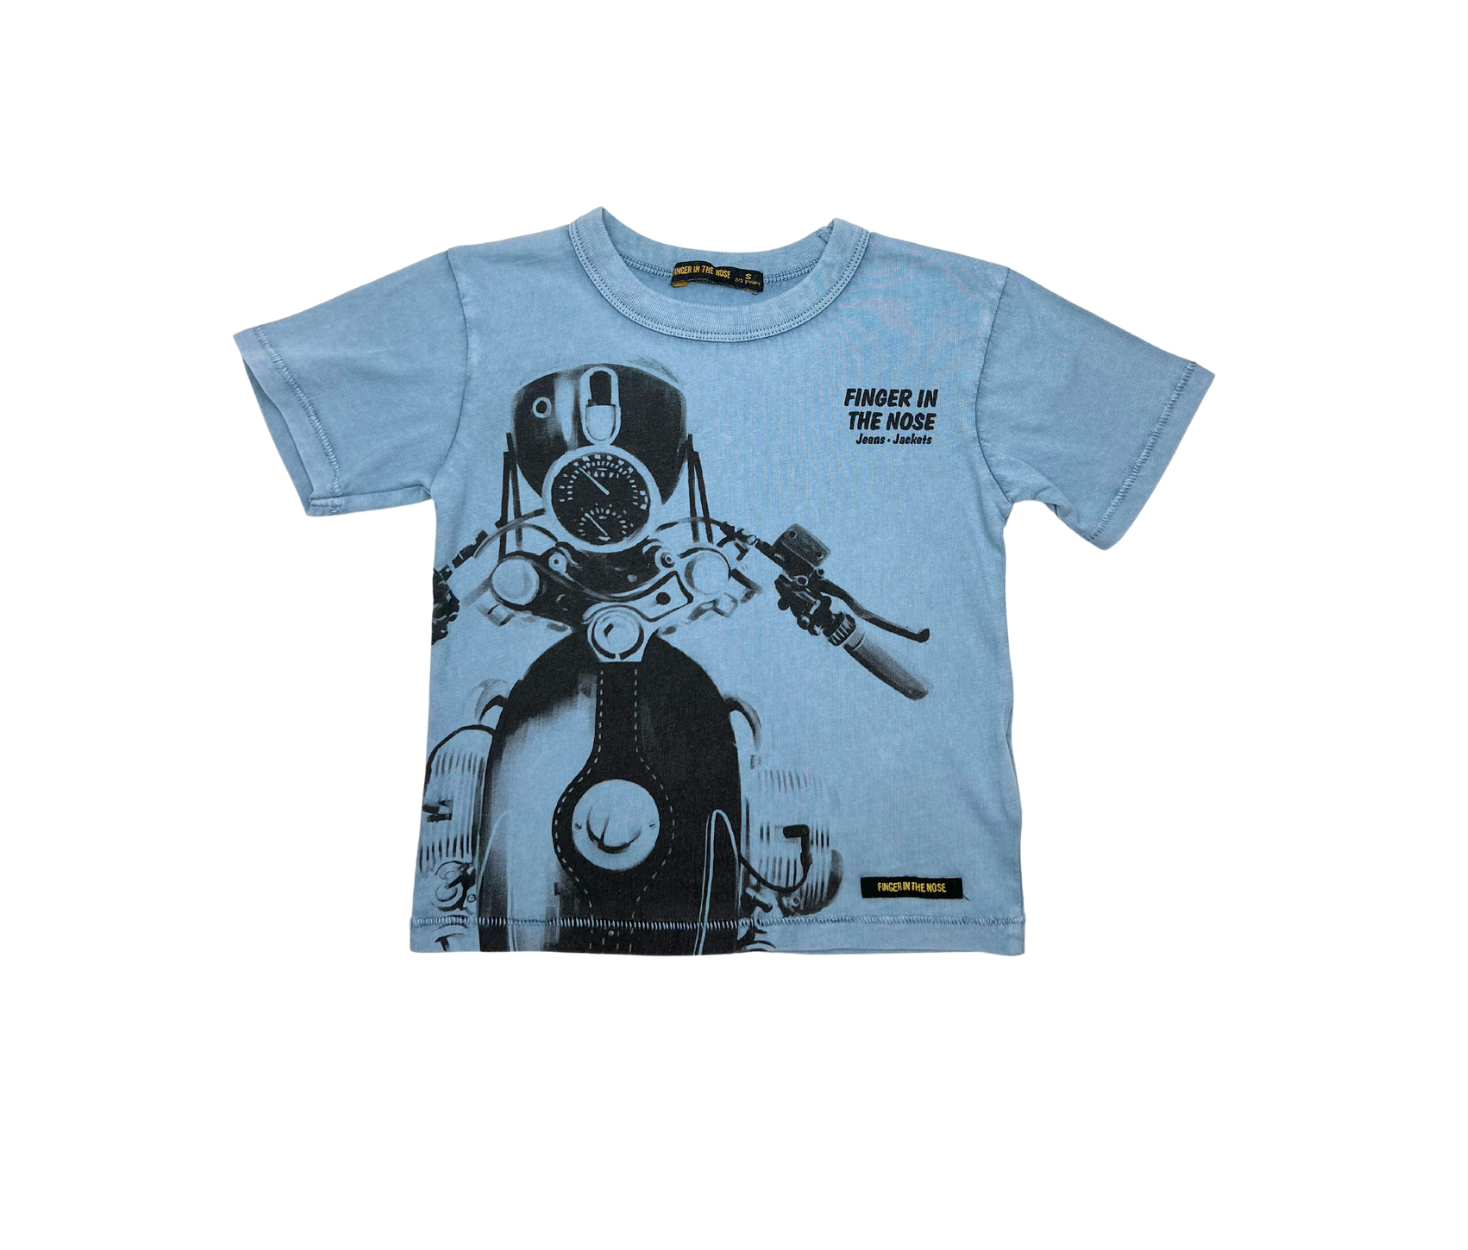 FINGER IN THE NOSE - T-shirt moto - 2/3 ans